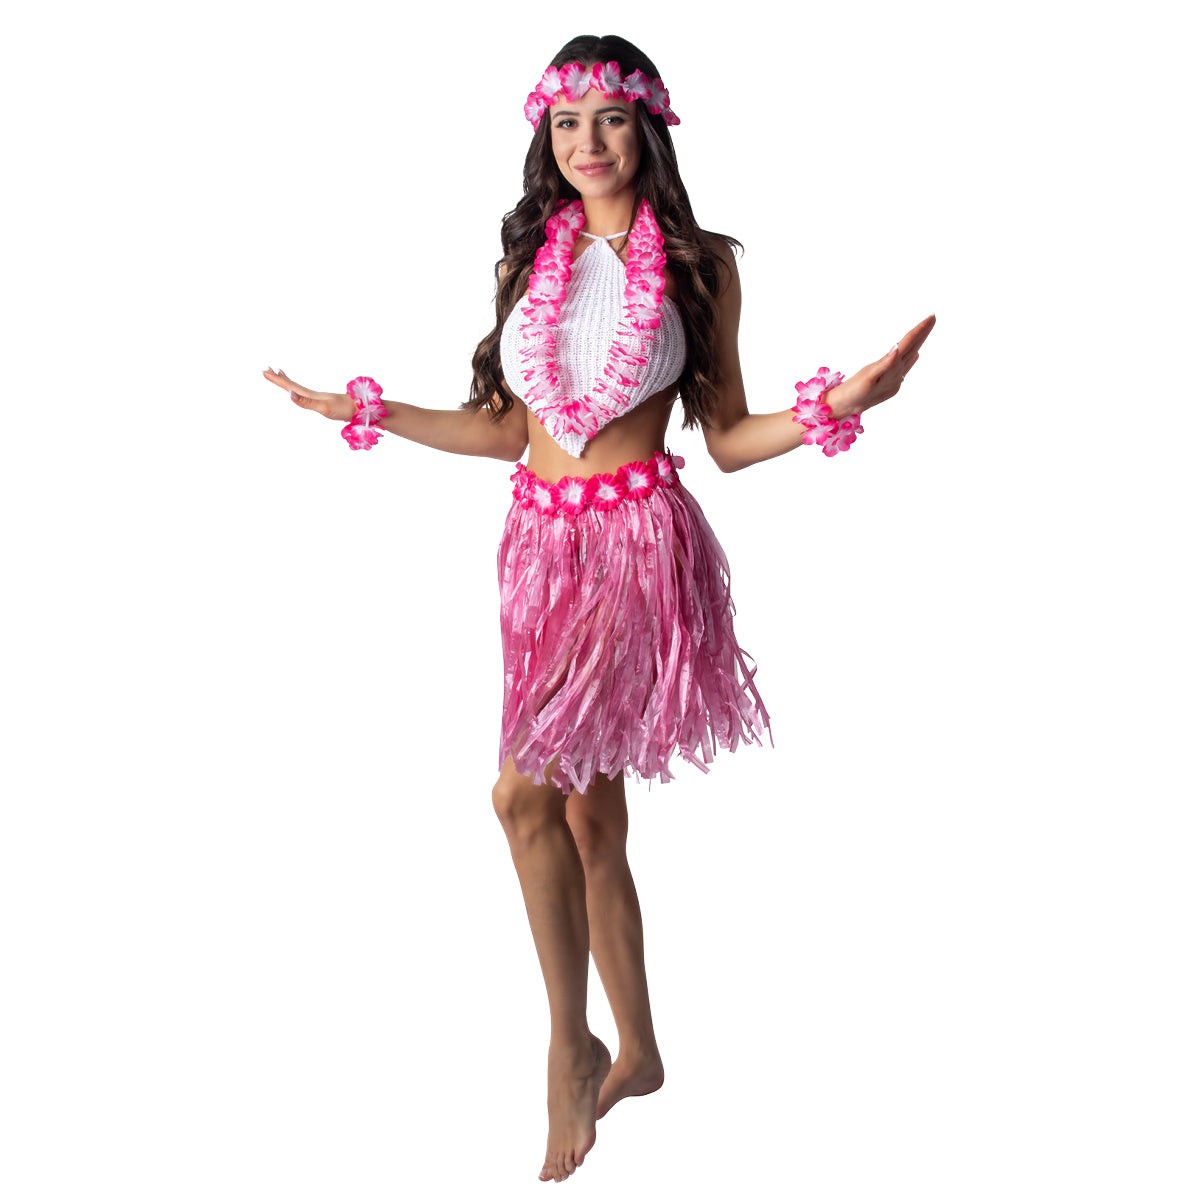 LIANGSHAN DAJIN GIFTS & TOYS CO LTD Theme Party Hula Short Skirt Kit for adults, 5 Count 810077654316